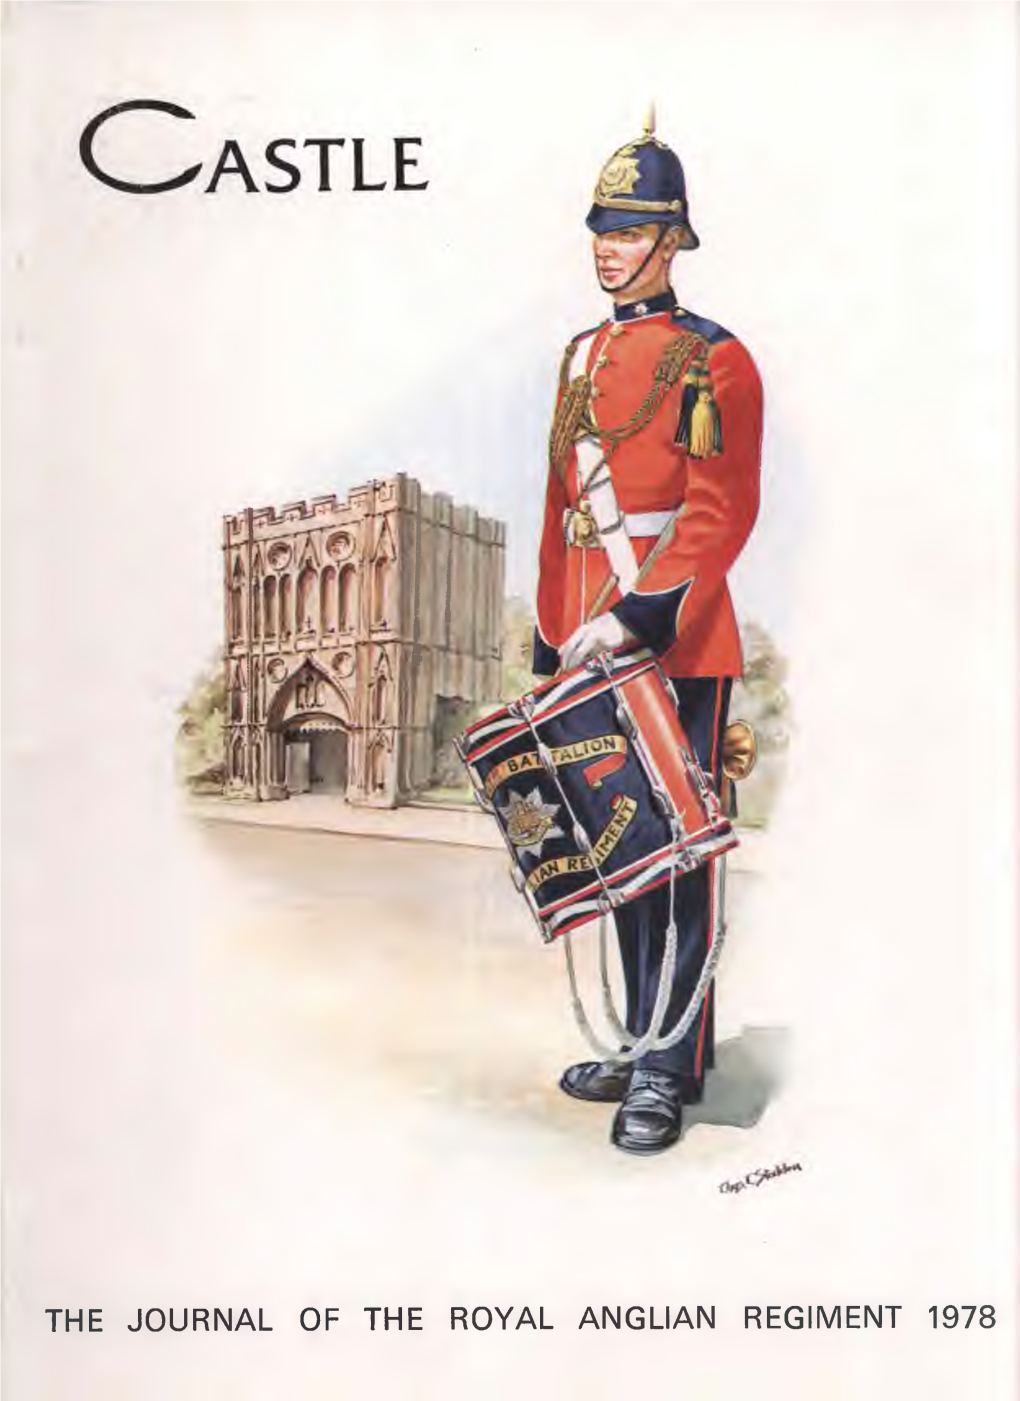 The Journal of the Royal Anglian Regiment 1978